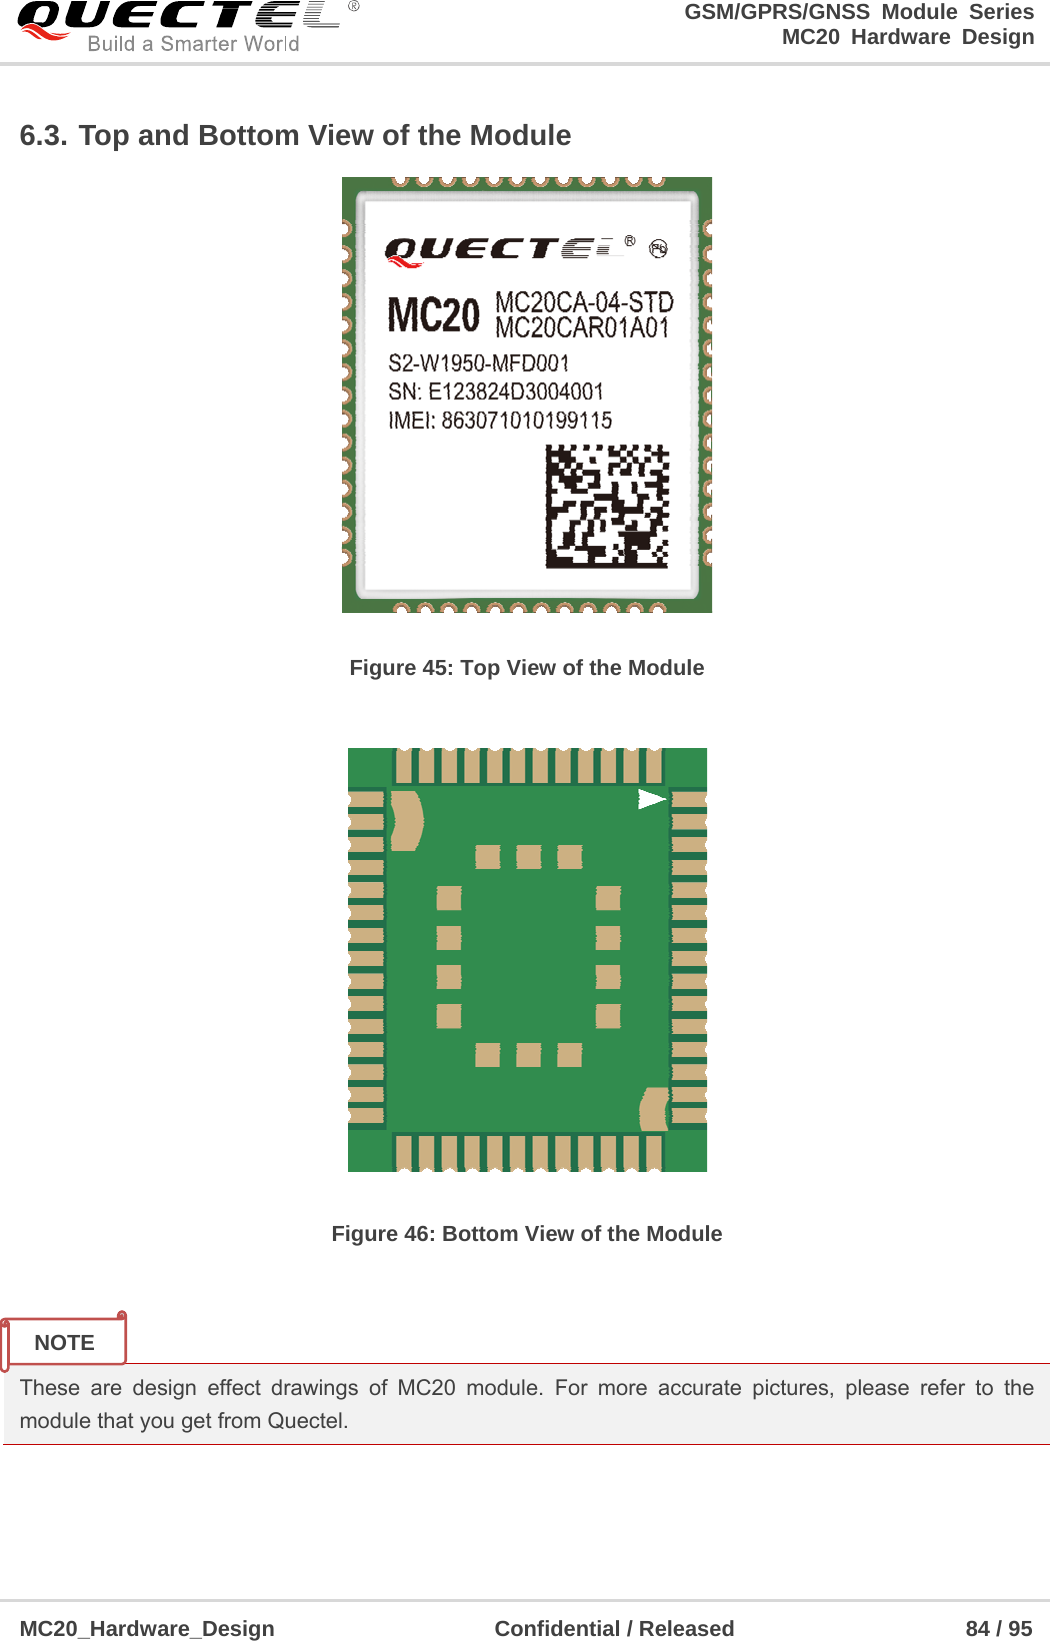                                                                     GSM/GPRS/GNSS Module Series                                                                 MC20 Hardware Design  MC20_Hardware_Design                    Confidential / Released                     84 / 95     6.3. Top and Bottom View of the Module  Figure 45: Top View of the Module   Figure 46: Bottom View of the Module   These are design effect drawings of MC20 module. For more accurate pictures, please refer to the module that you get from Quectel.    NOTE 